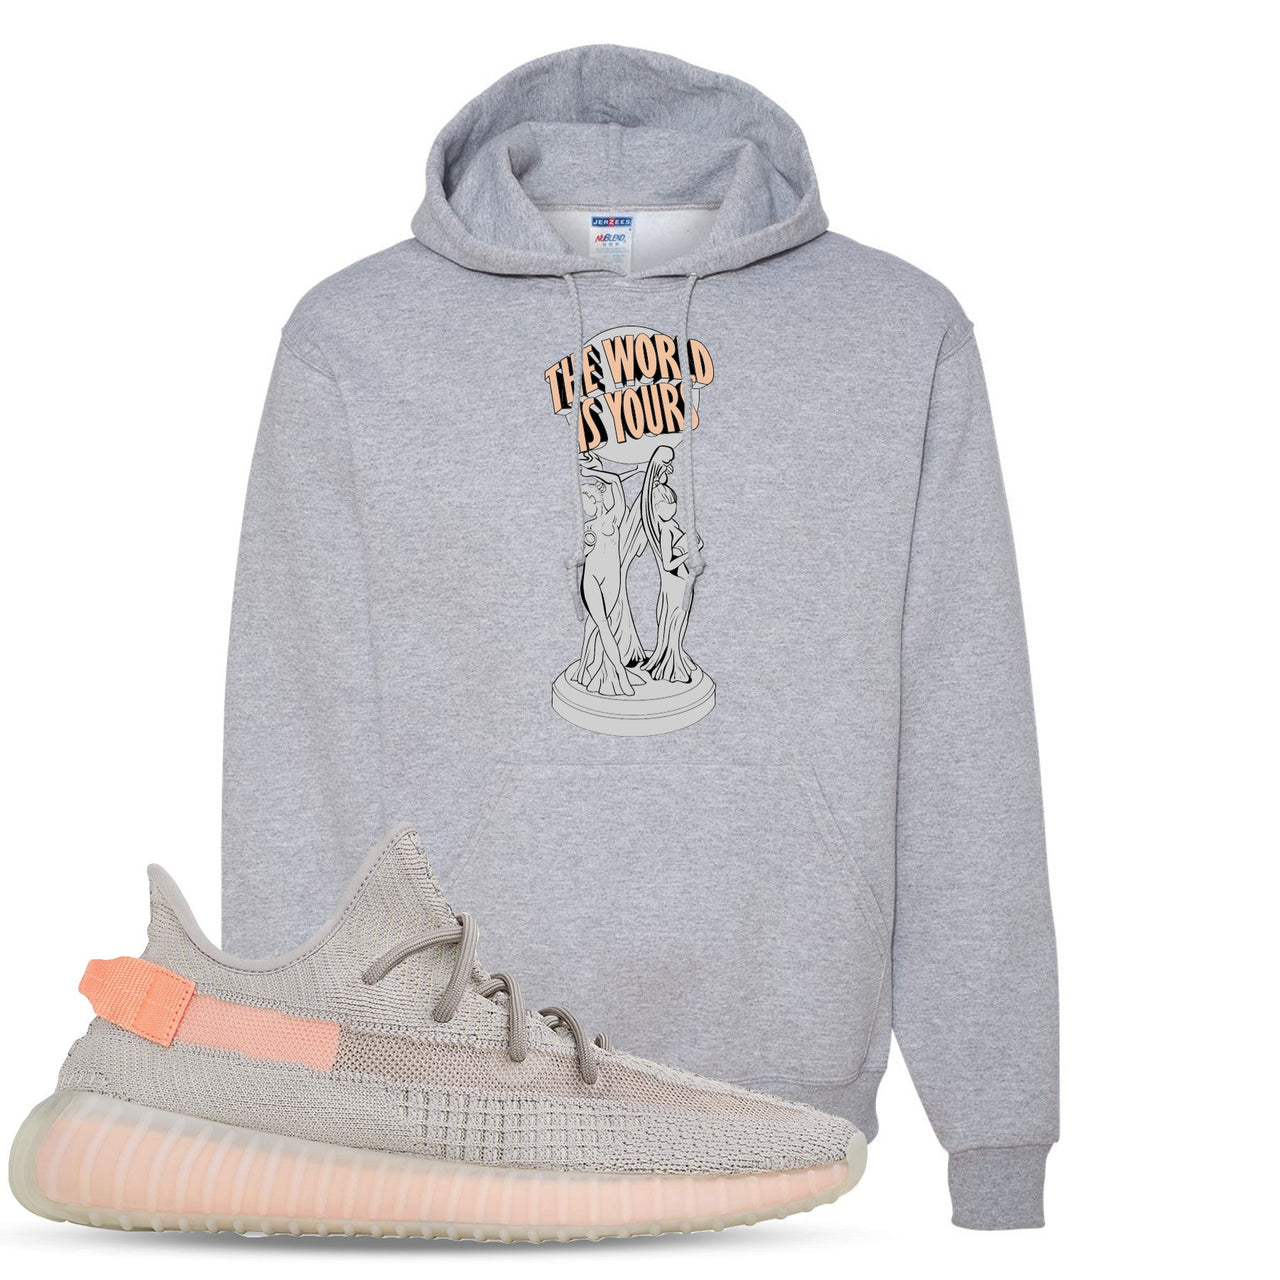 True Form v2 350s Hoodie | The World Is Yours, Heathered Light Gray